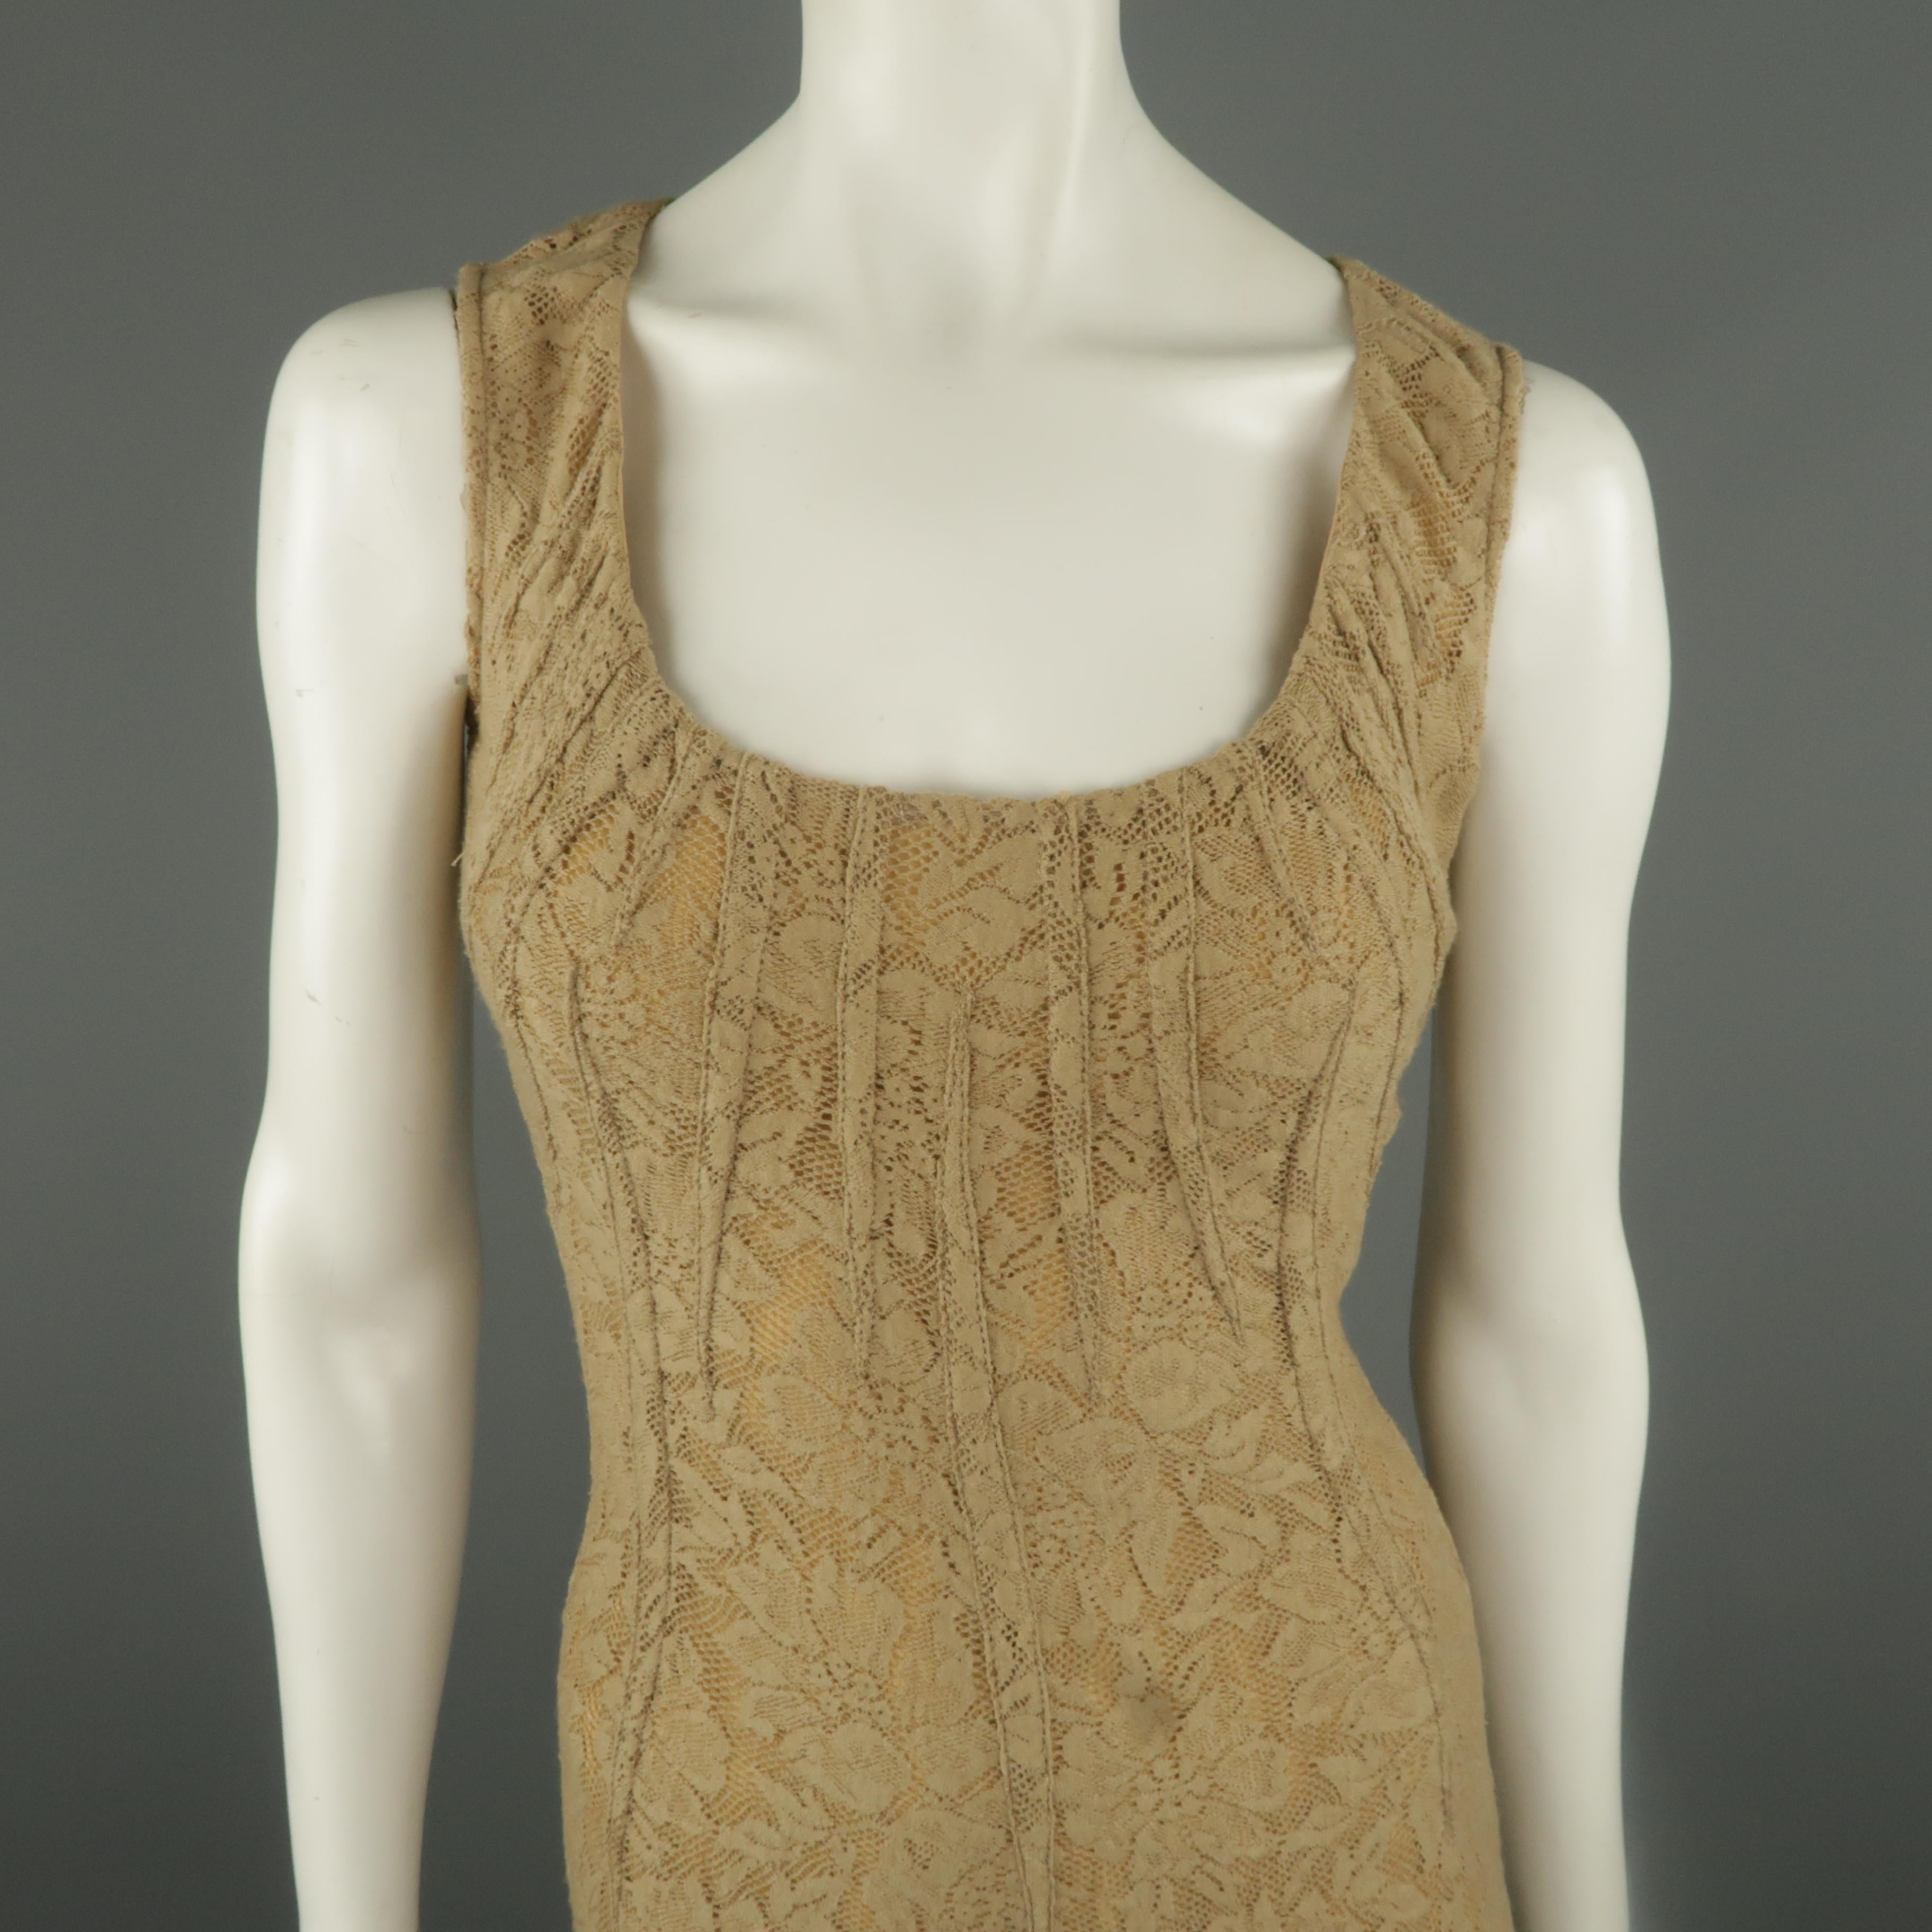 DOLCE & GABBANA cocktail midi dress comes in beige stretch wool lace with a scoop neck, darted accents, back zip, and fitted body. Made in Italy.
 
Good Pre-Owned Condition.
Marked: IT 40
 
Measurements:
 
Shoulder: 14 n.
Bust: 34 in.
Waist: 26